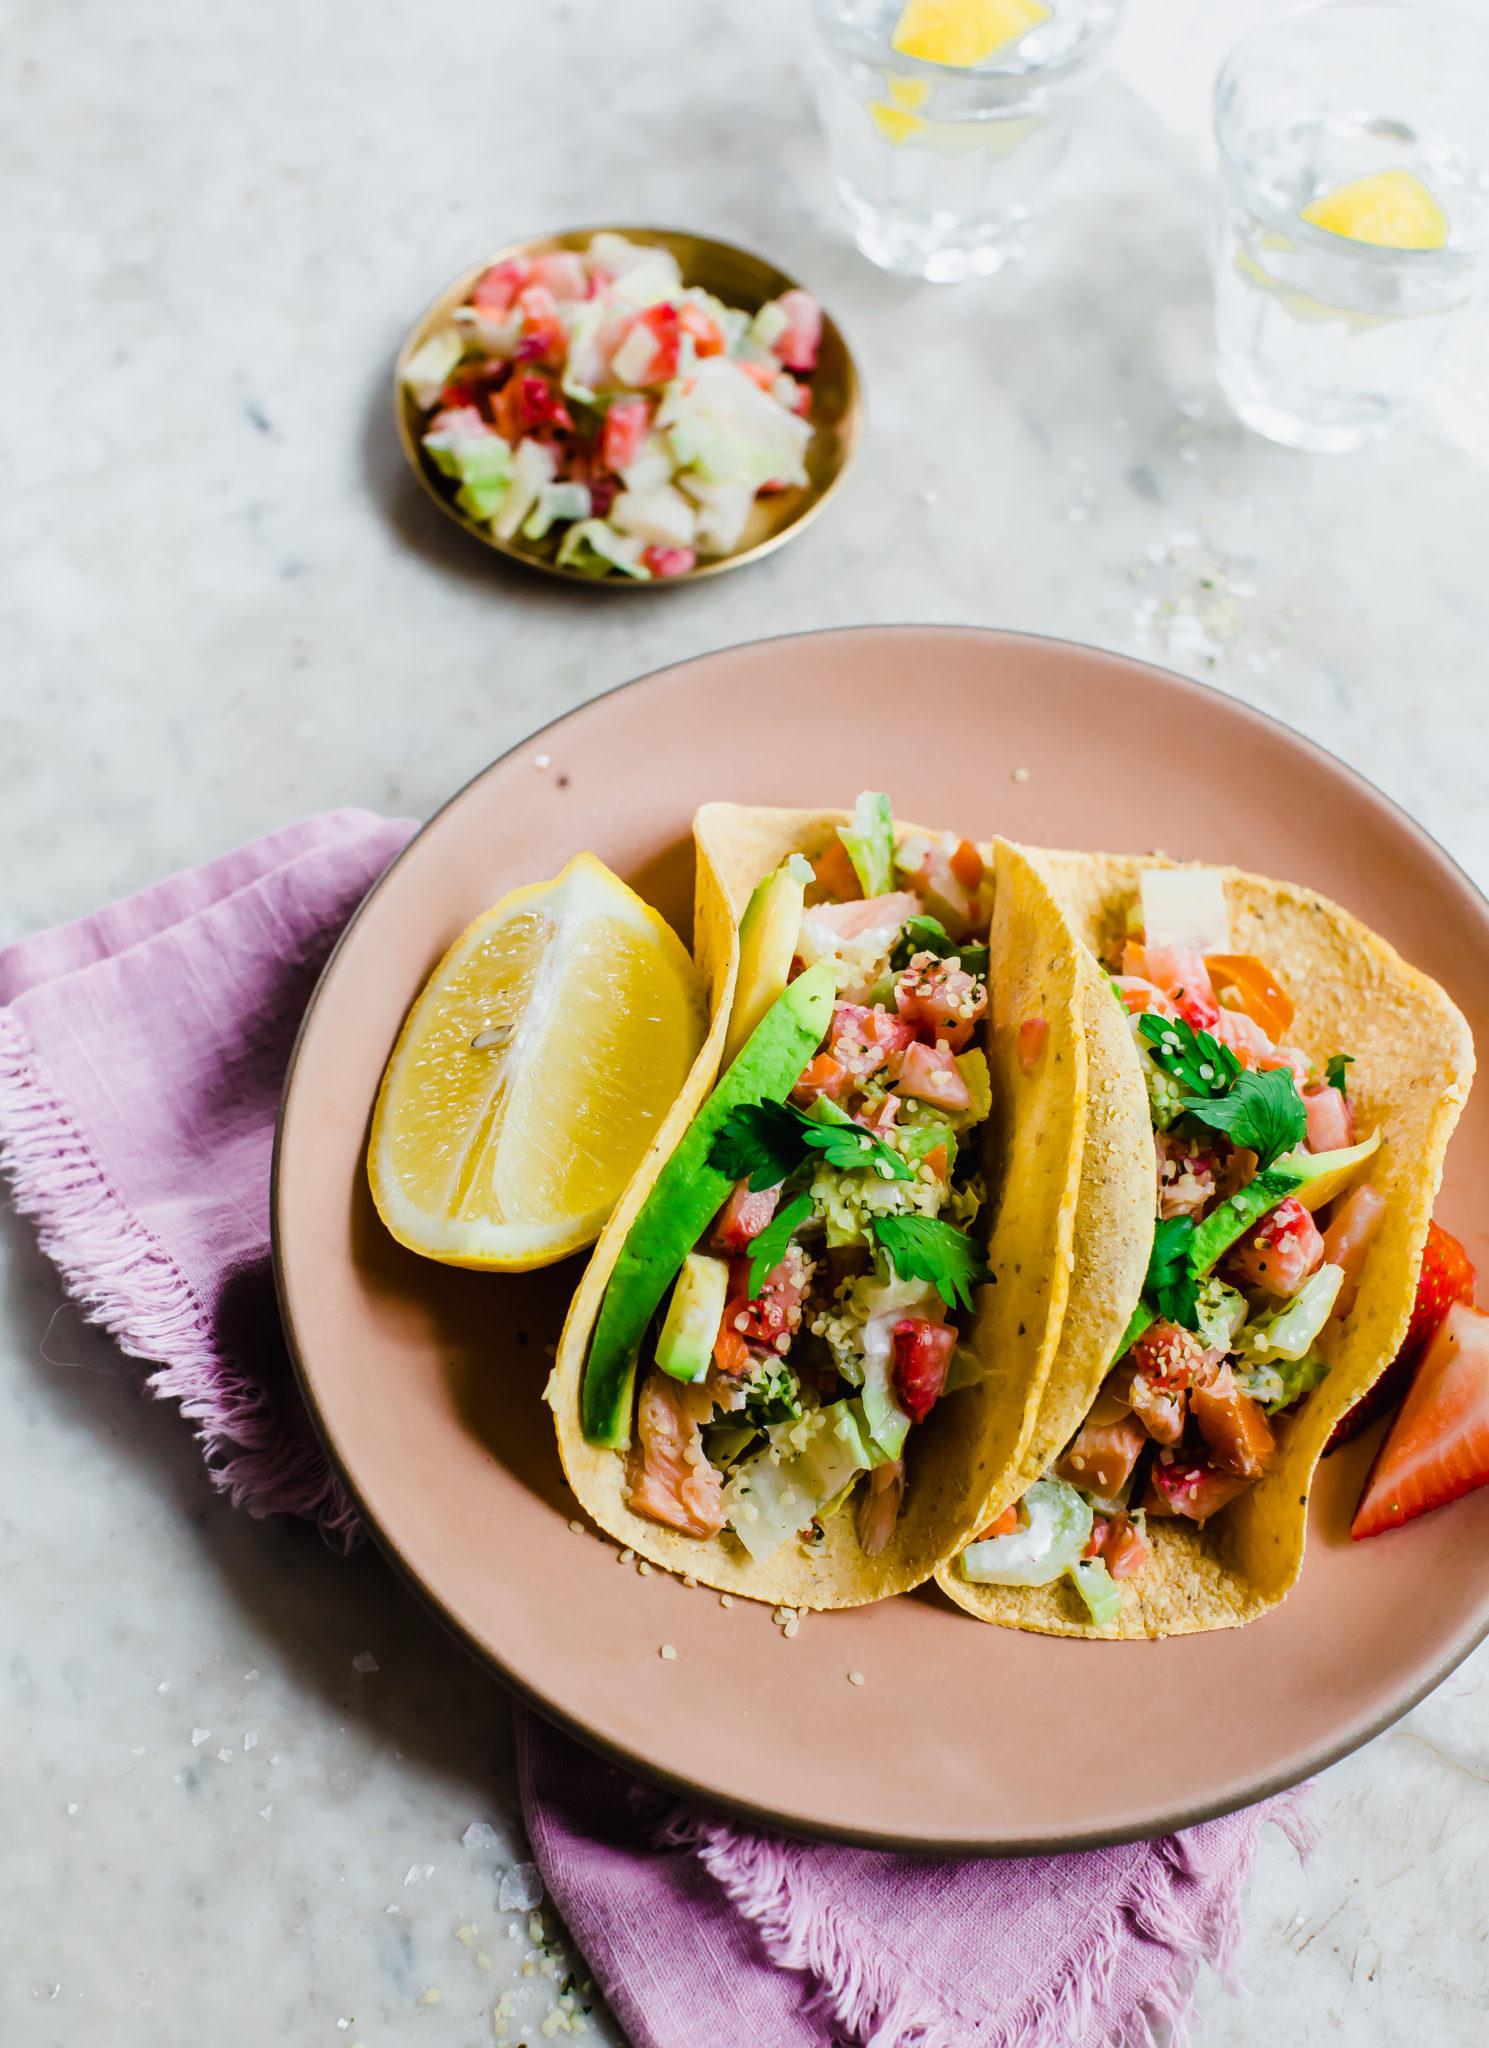 Smoked Fish Tacos with Berry Celery Salsa - California Giant Berry Farms